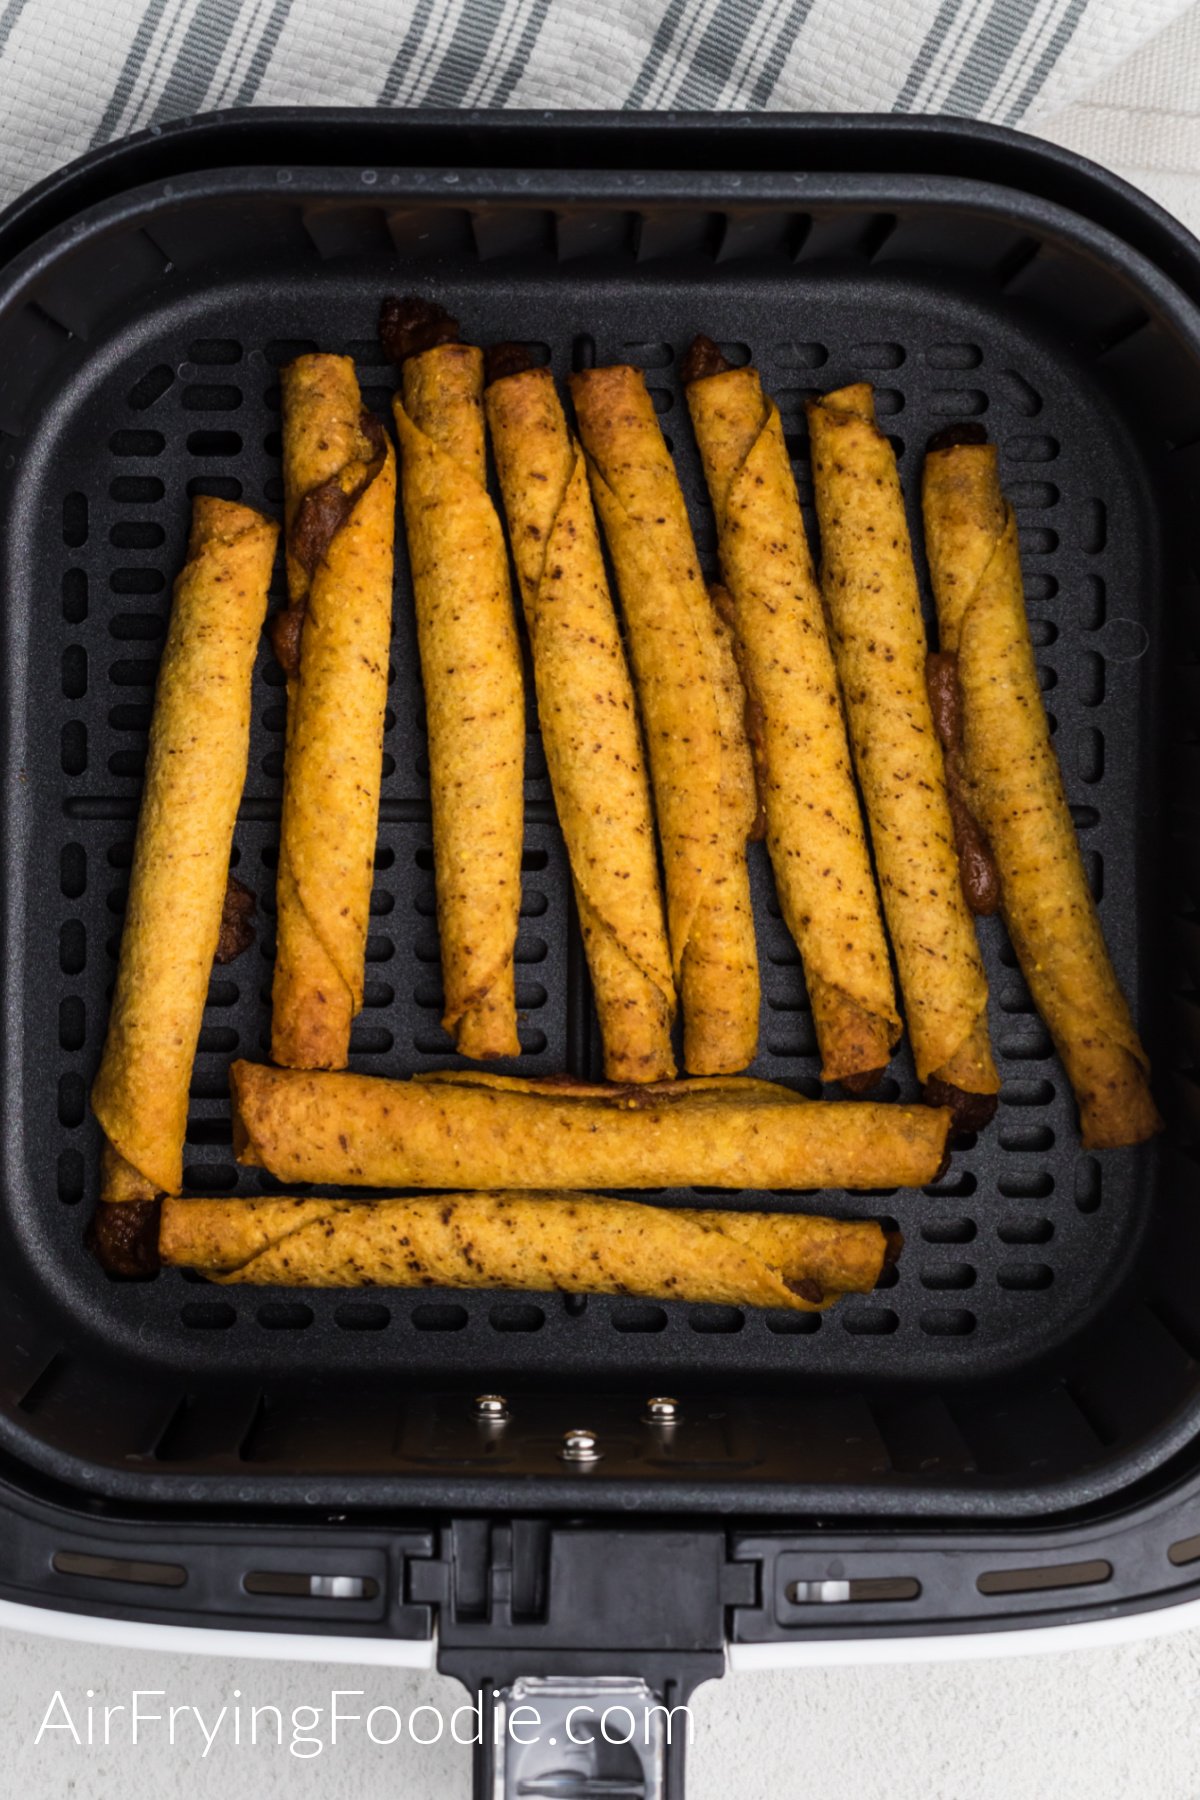 Cooked taquitos in the basket of the air fryer